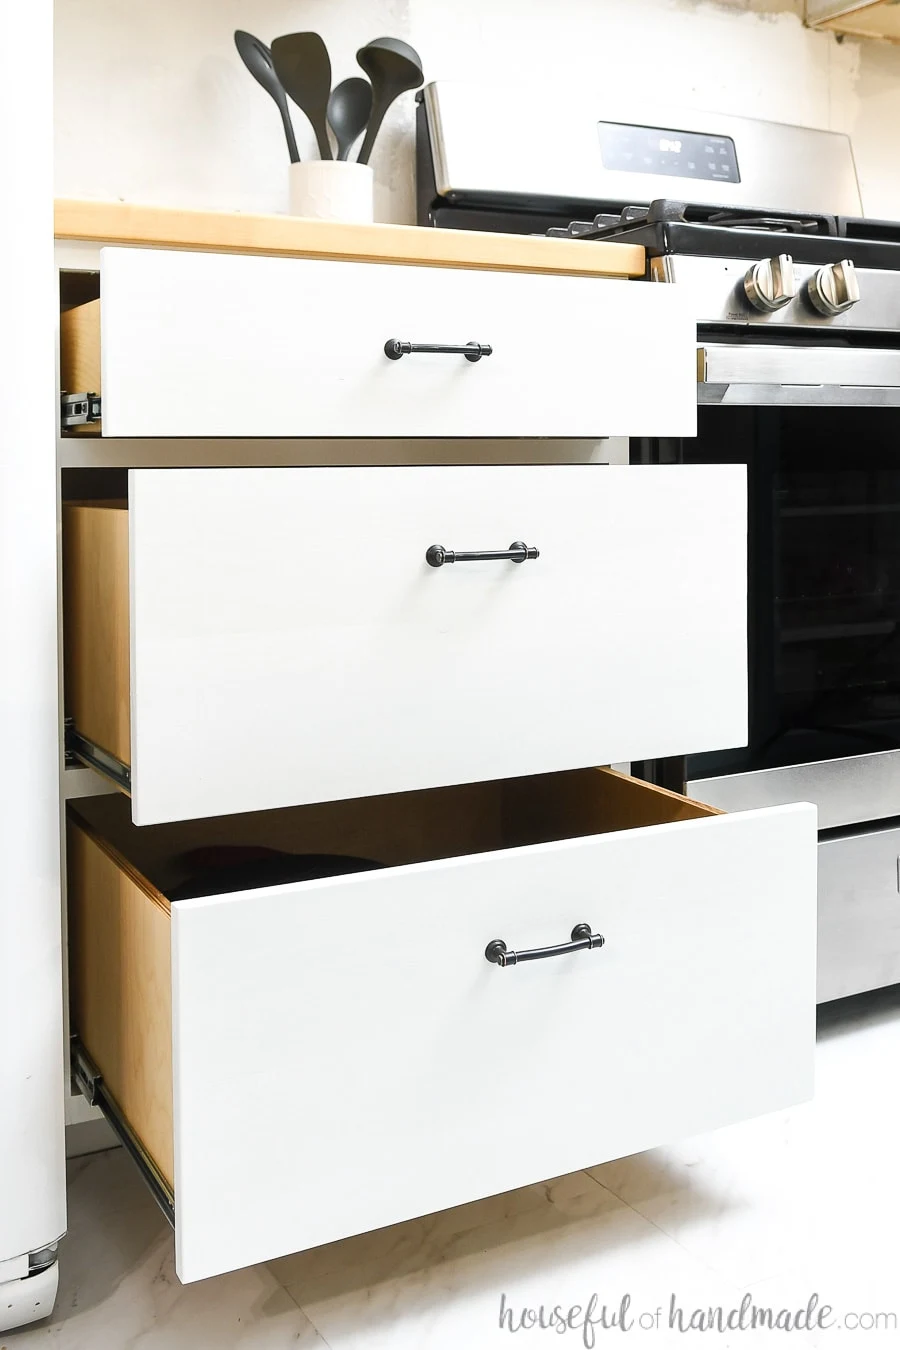 Three white kitchen cabinet drawers with black pulls pulled out partially showing the ball bearing drawer slides on the sides of the drawers. 